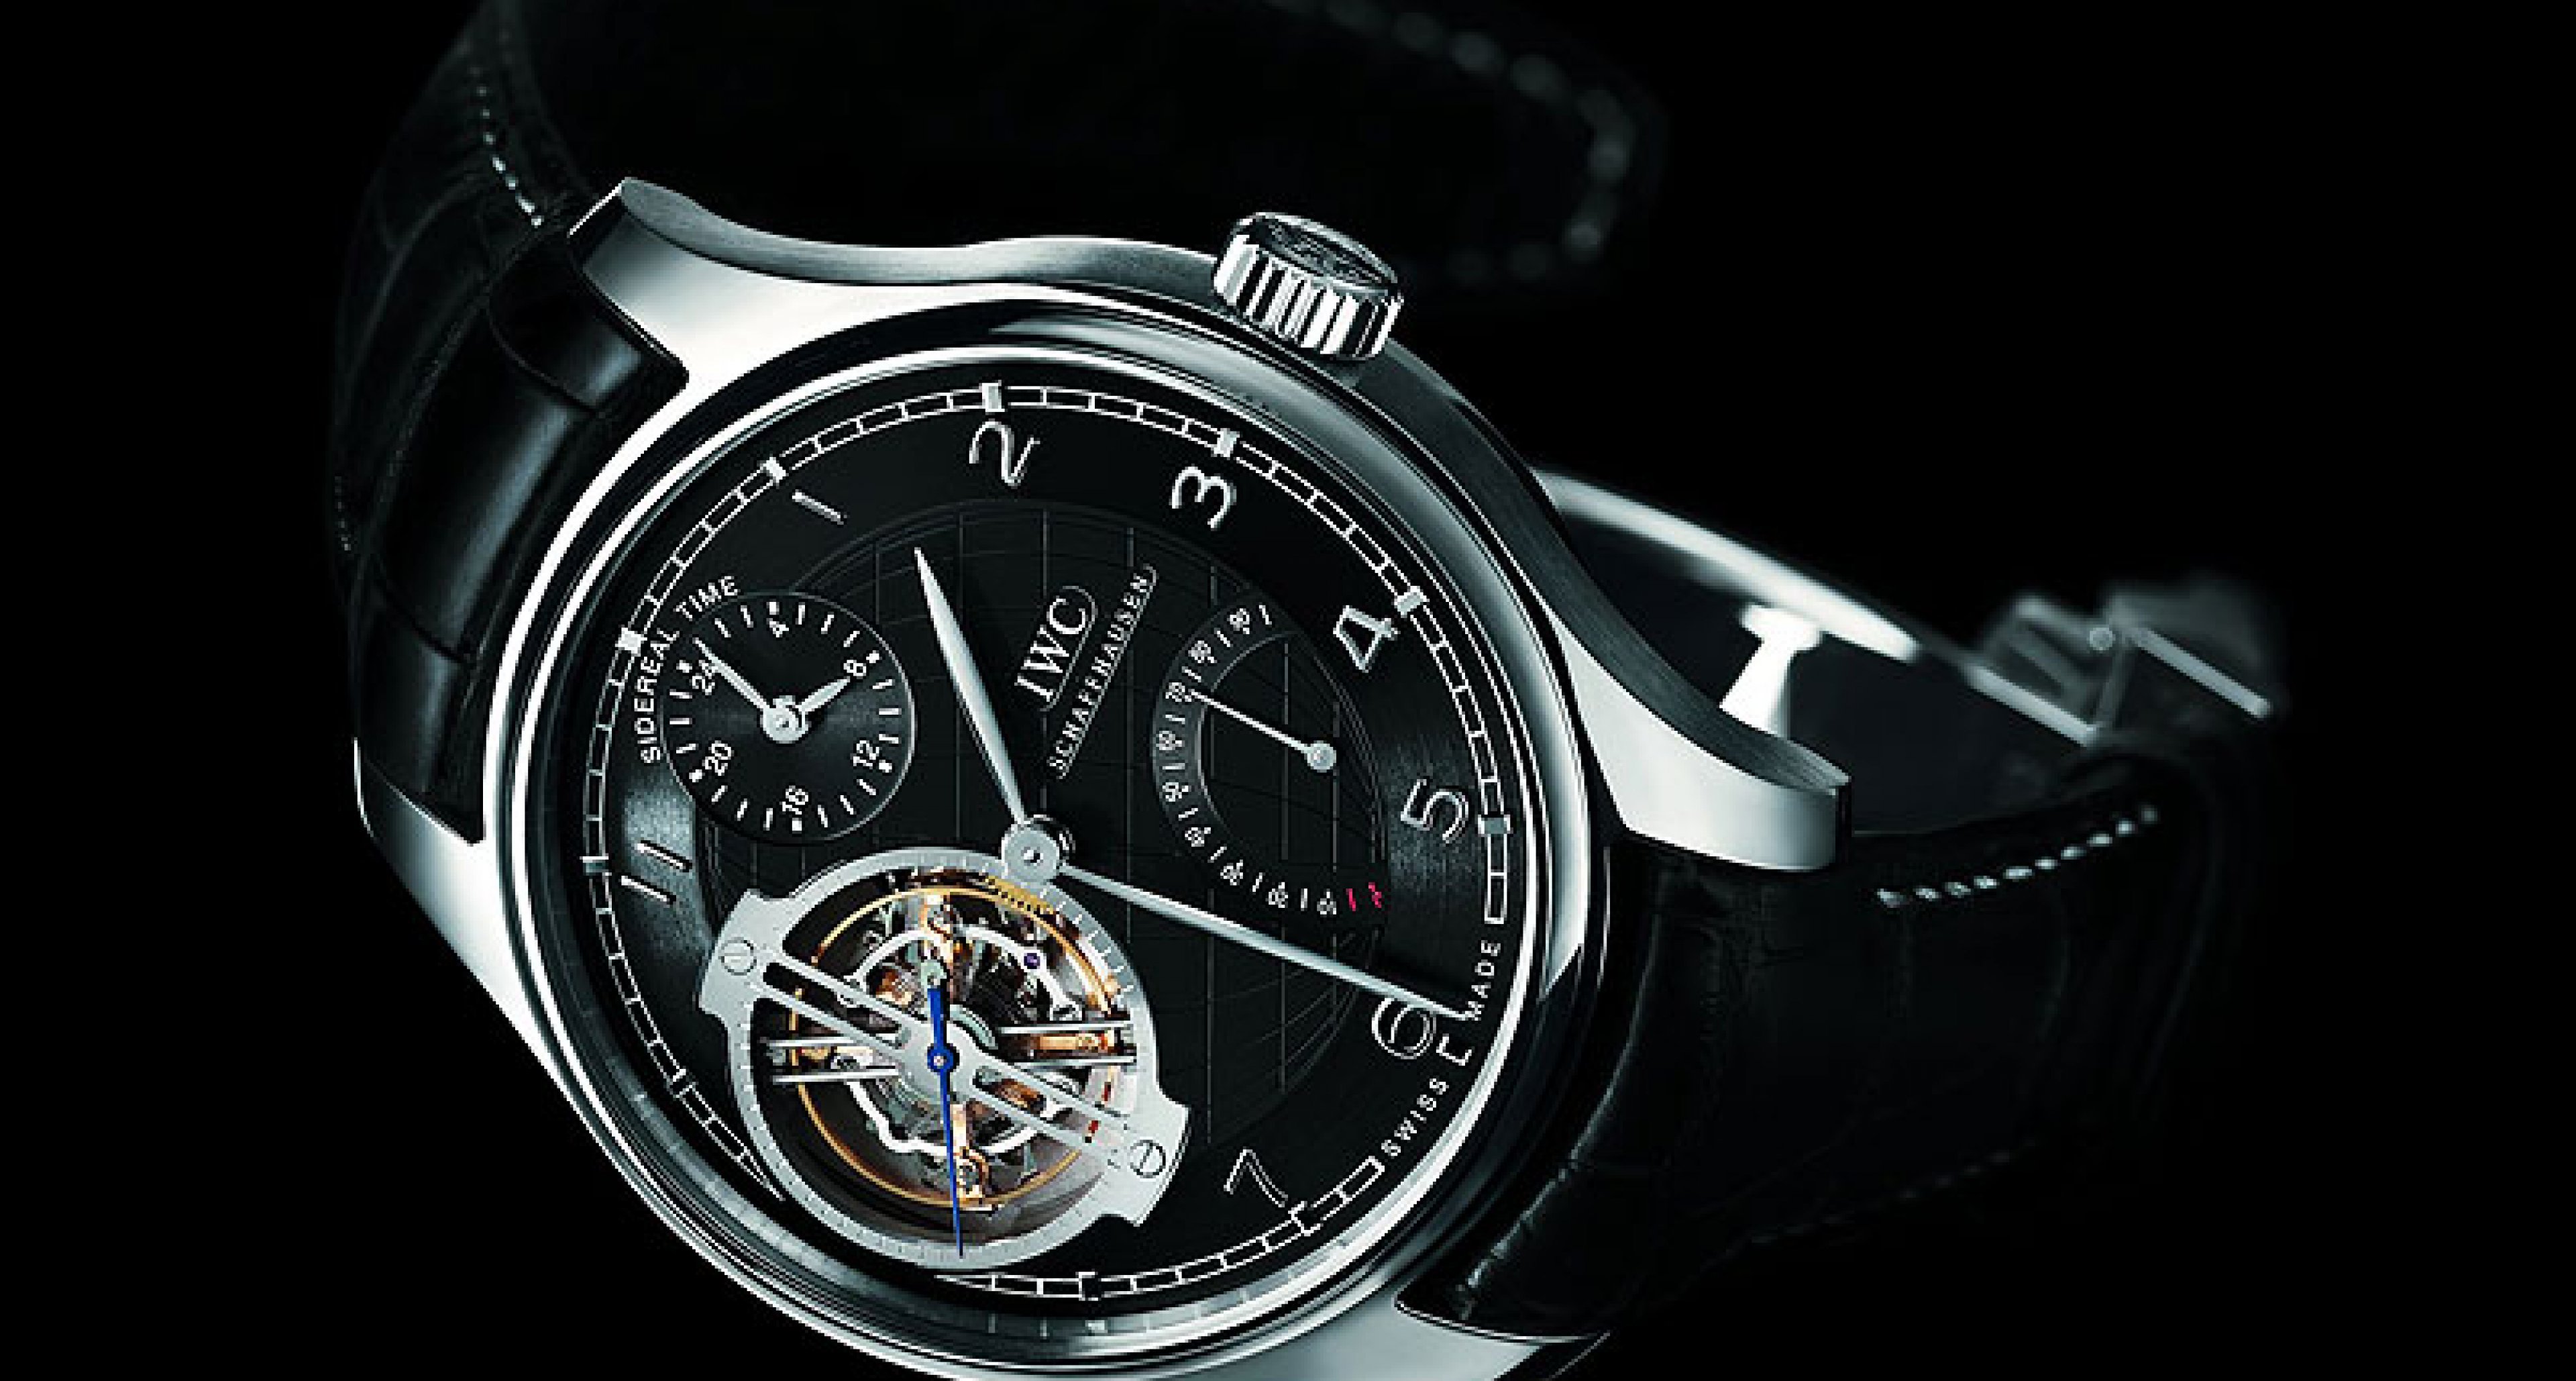 ‘Portuguese Sidérale Scafusia’: The most complex timepiece ever created by IWC